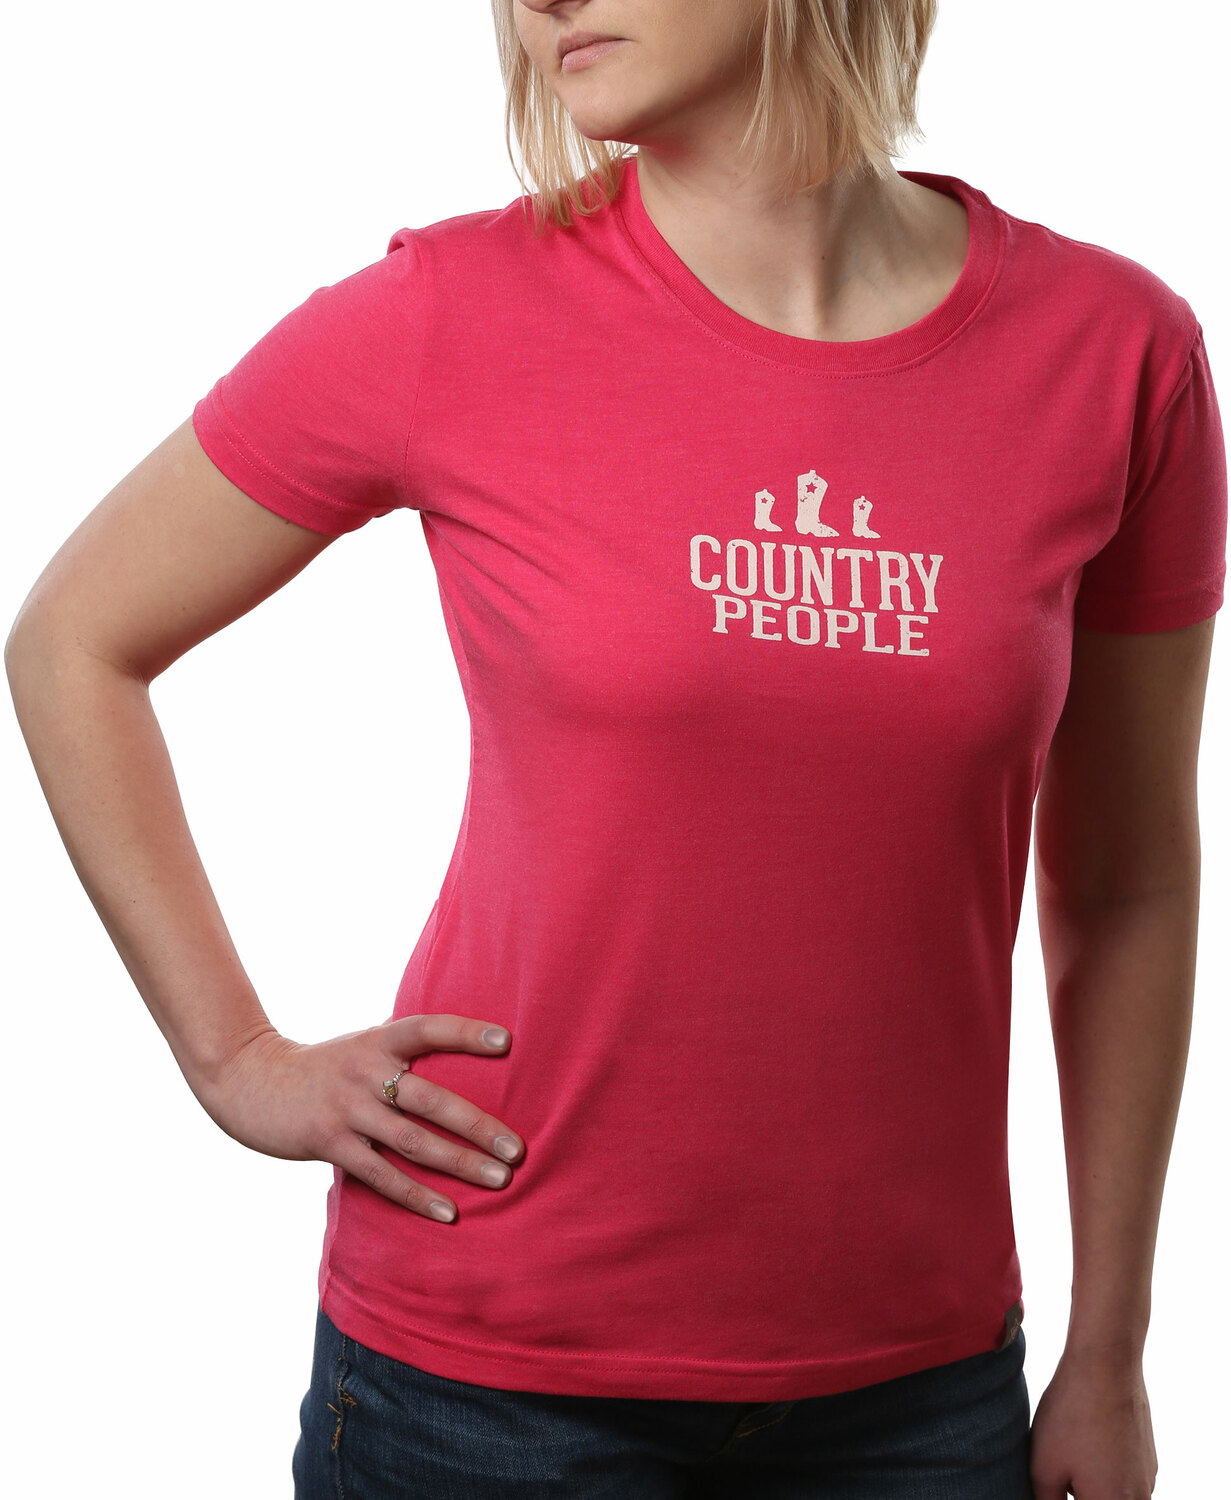 Country People by We People - <em>Country</em> - Medium Women's T-Shirt -